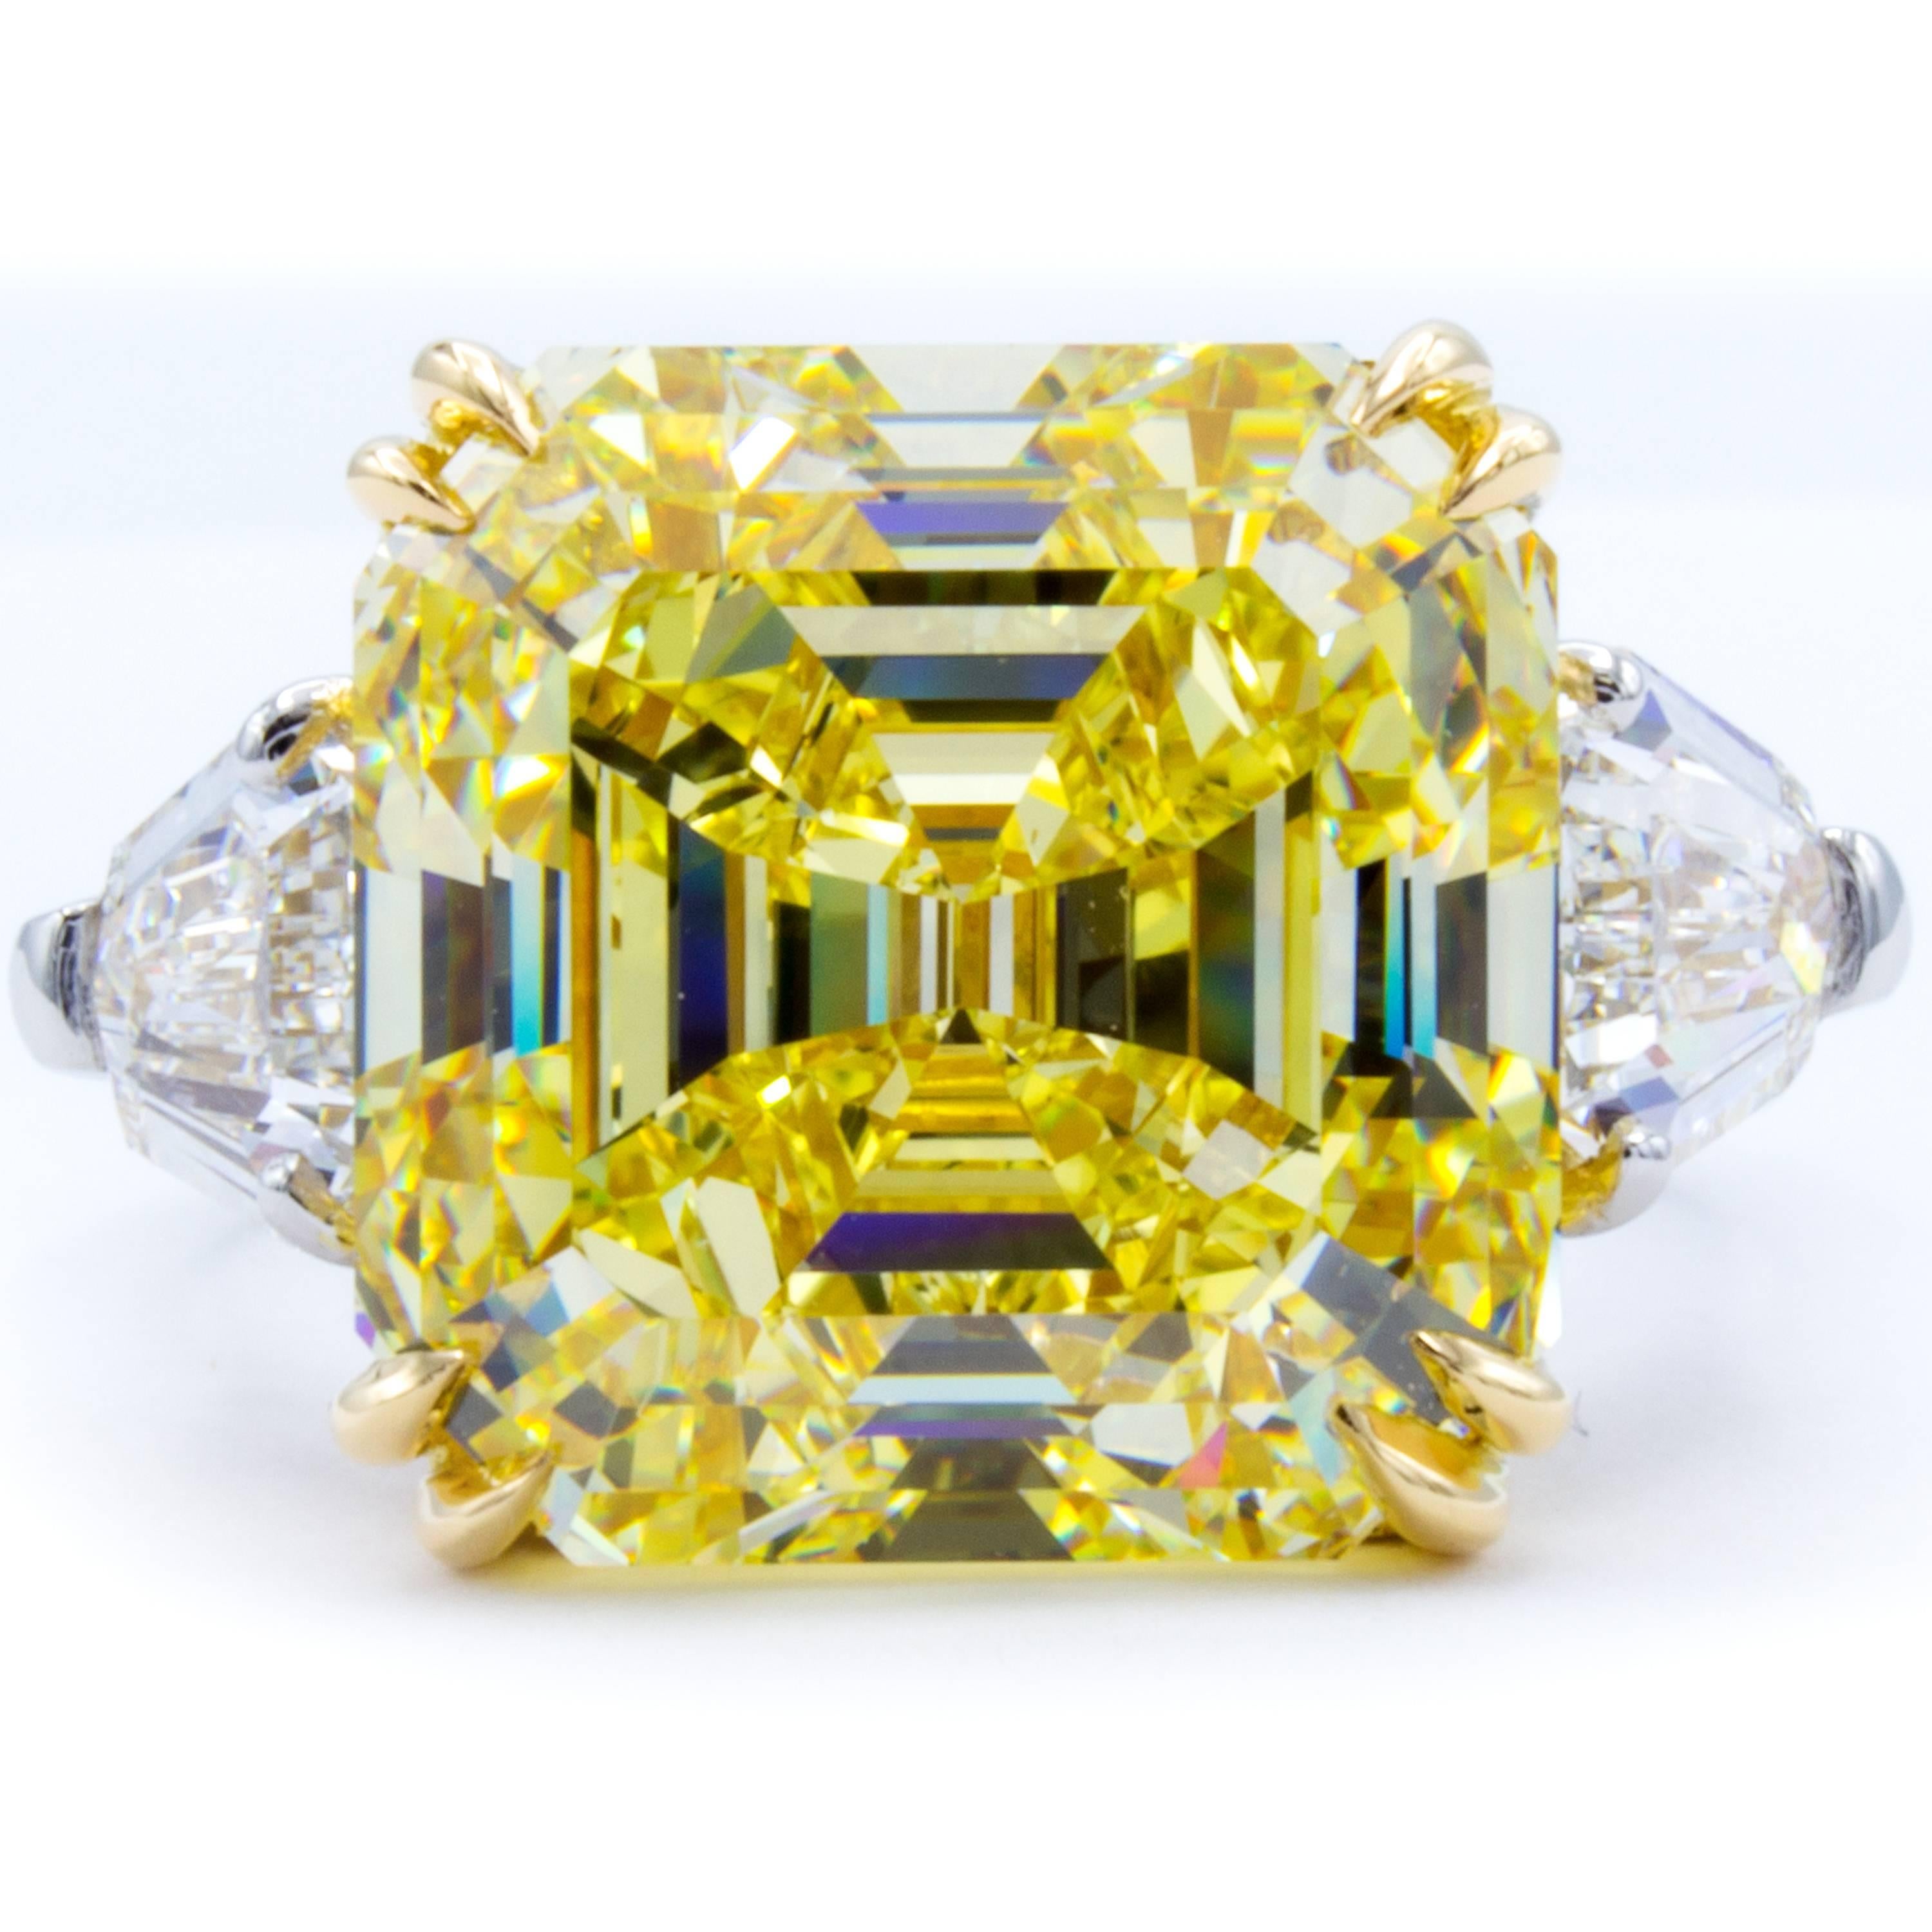 An impossible beauty emerges in this Rosenberg Diamonds & Co. engagement ring. An incredibly rare GIA certified 11.62 carat square emerald/asscher cut diamond captures the imagination with natural fancy intense yellow color and VVS2 clarity. The